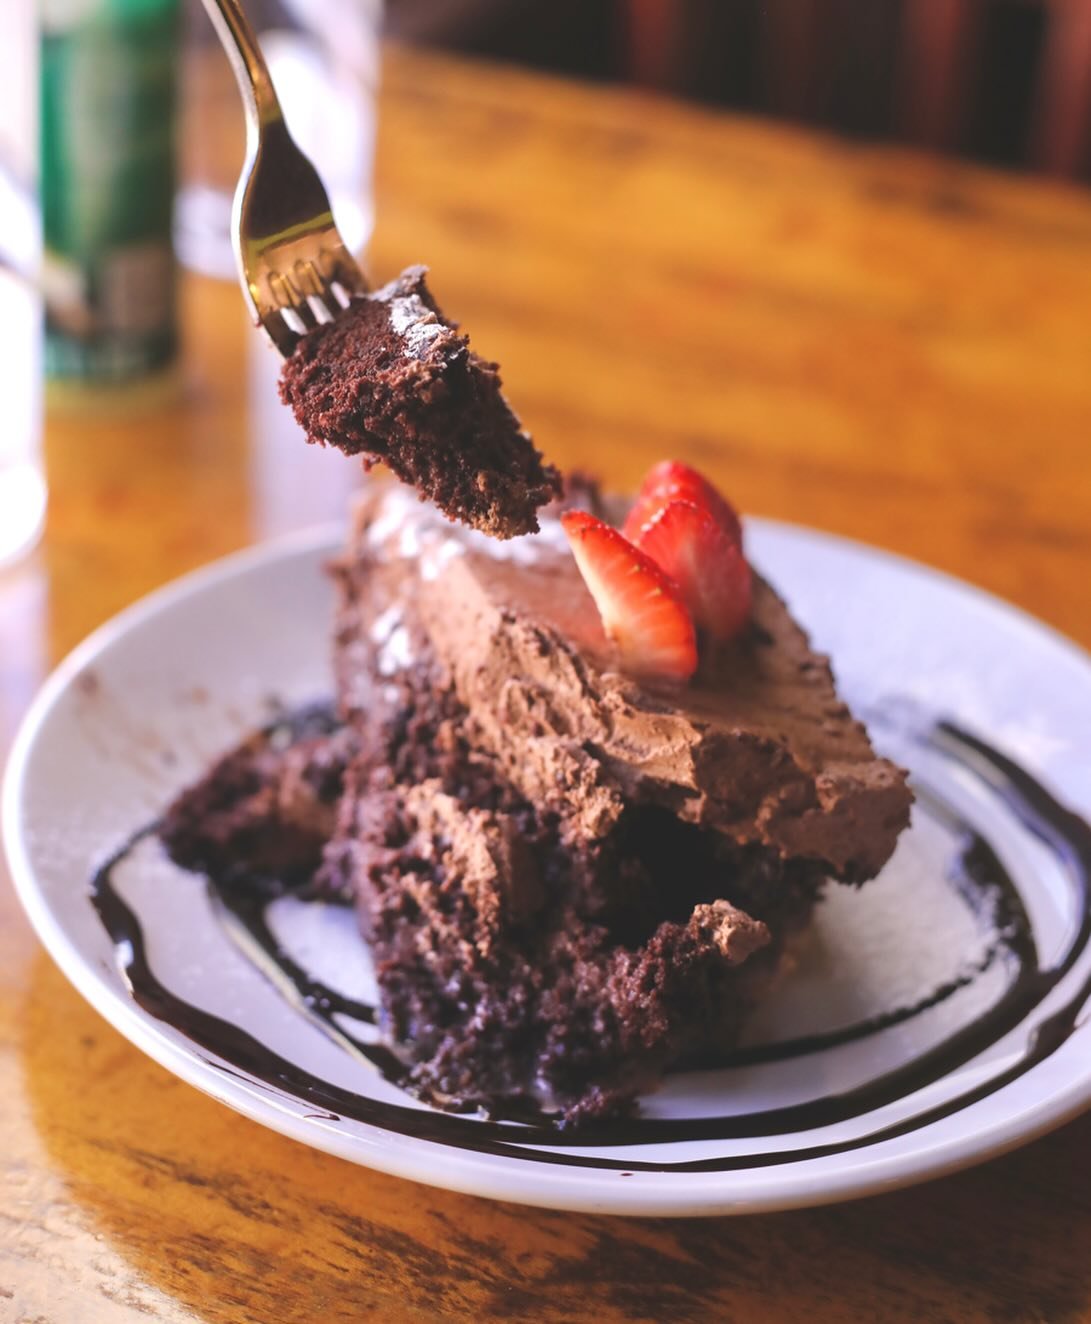 Start your weekend off on a sweet note with Tavos! 🍫 

Indulge in our fan-favorite Chocolate Tres Leches Cake &ndash; an ooey-gooey delight that&rsquo;s sure to satisfy your cravings. Save room for dessert and treat yourself to something decadent! ?